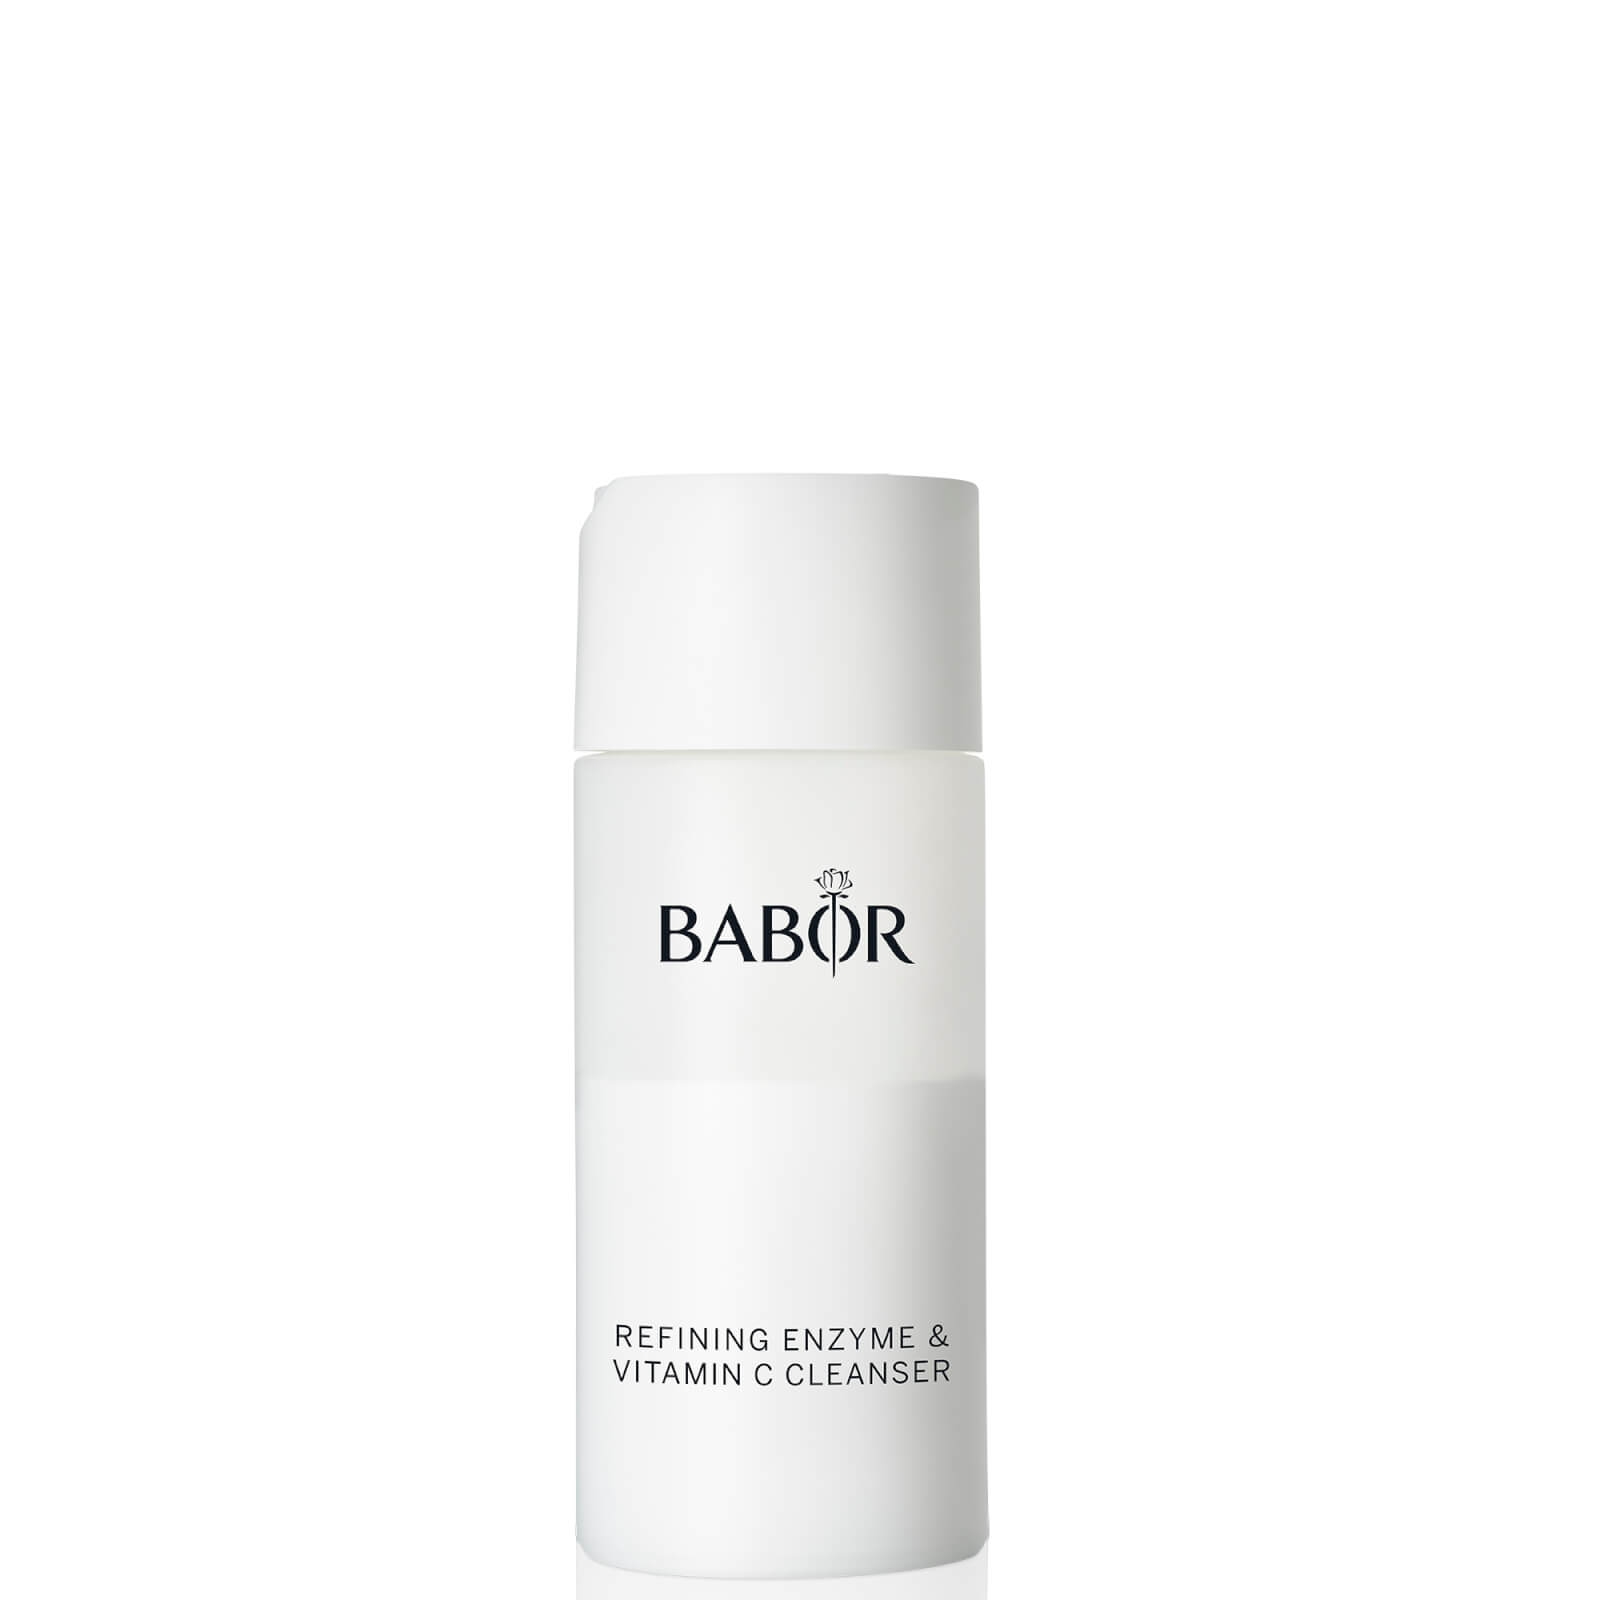 Babor Refining Enzyme & Vitamin C Cleanser 1.41 Oz.